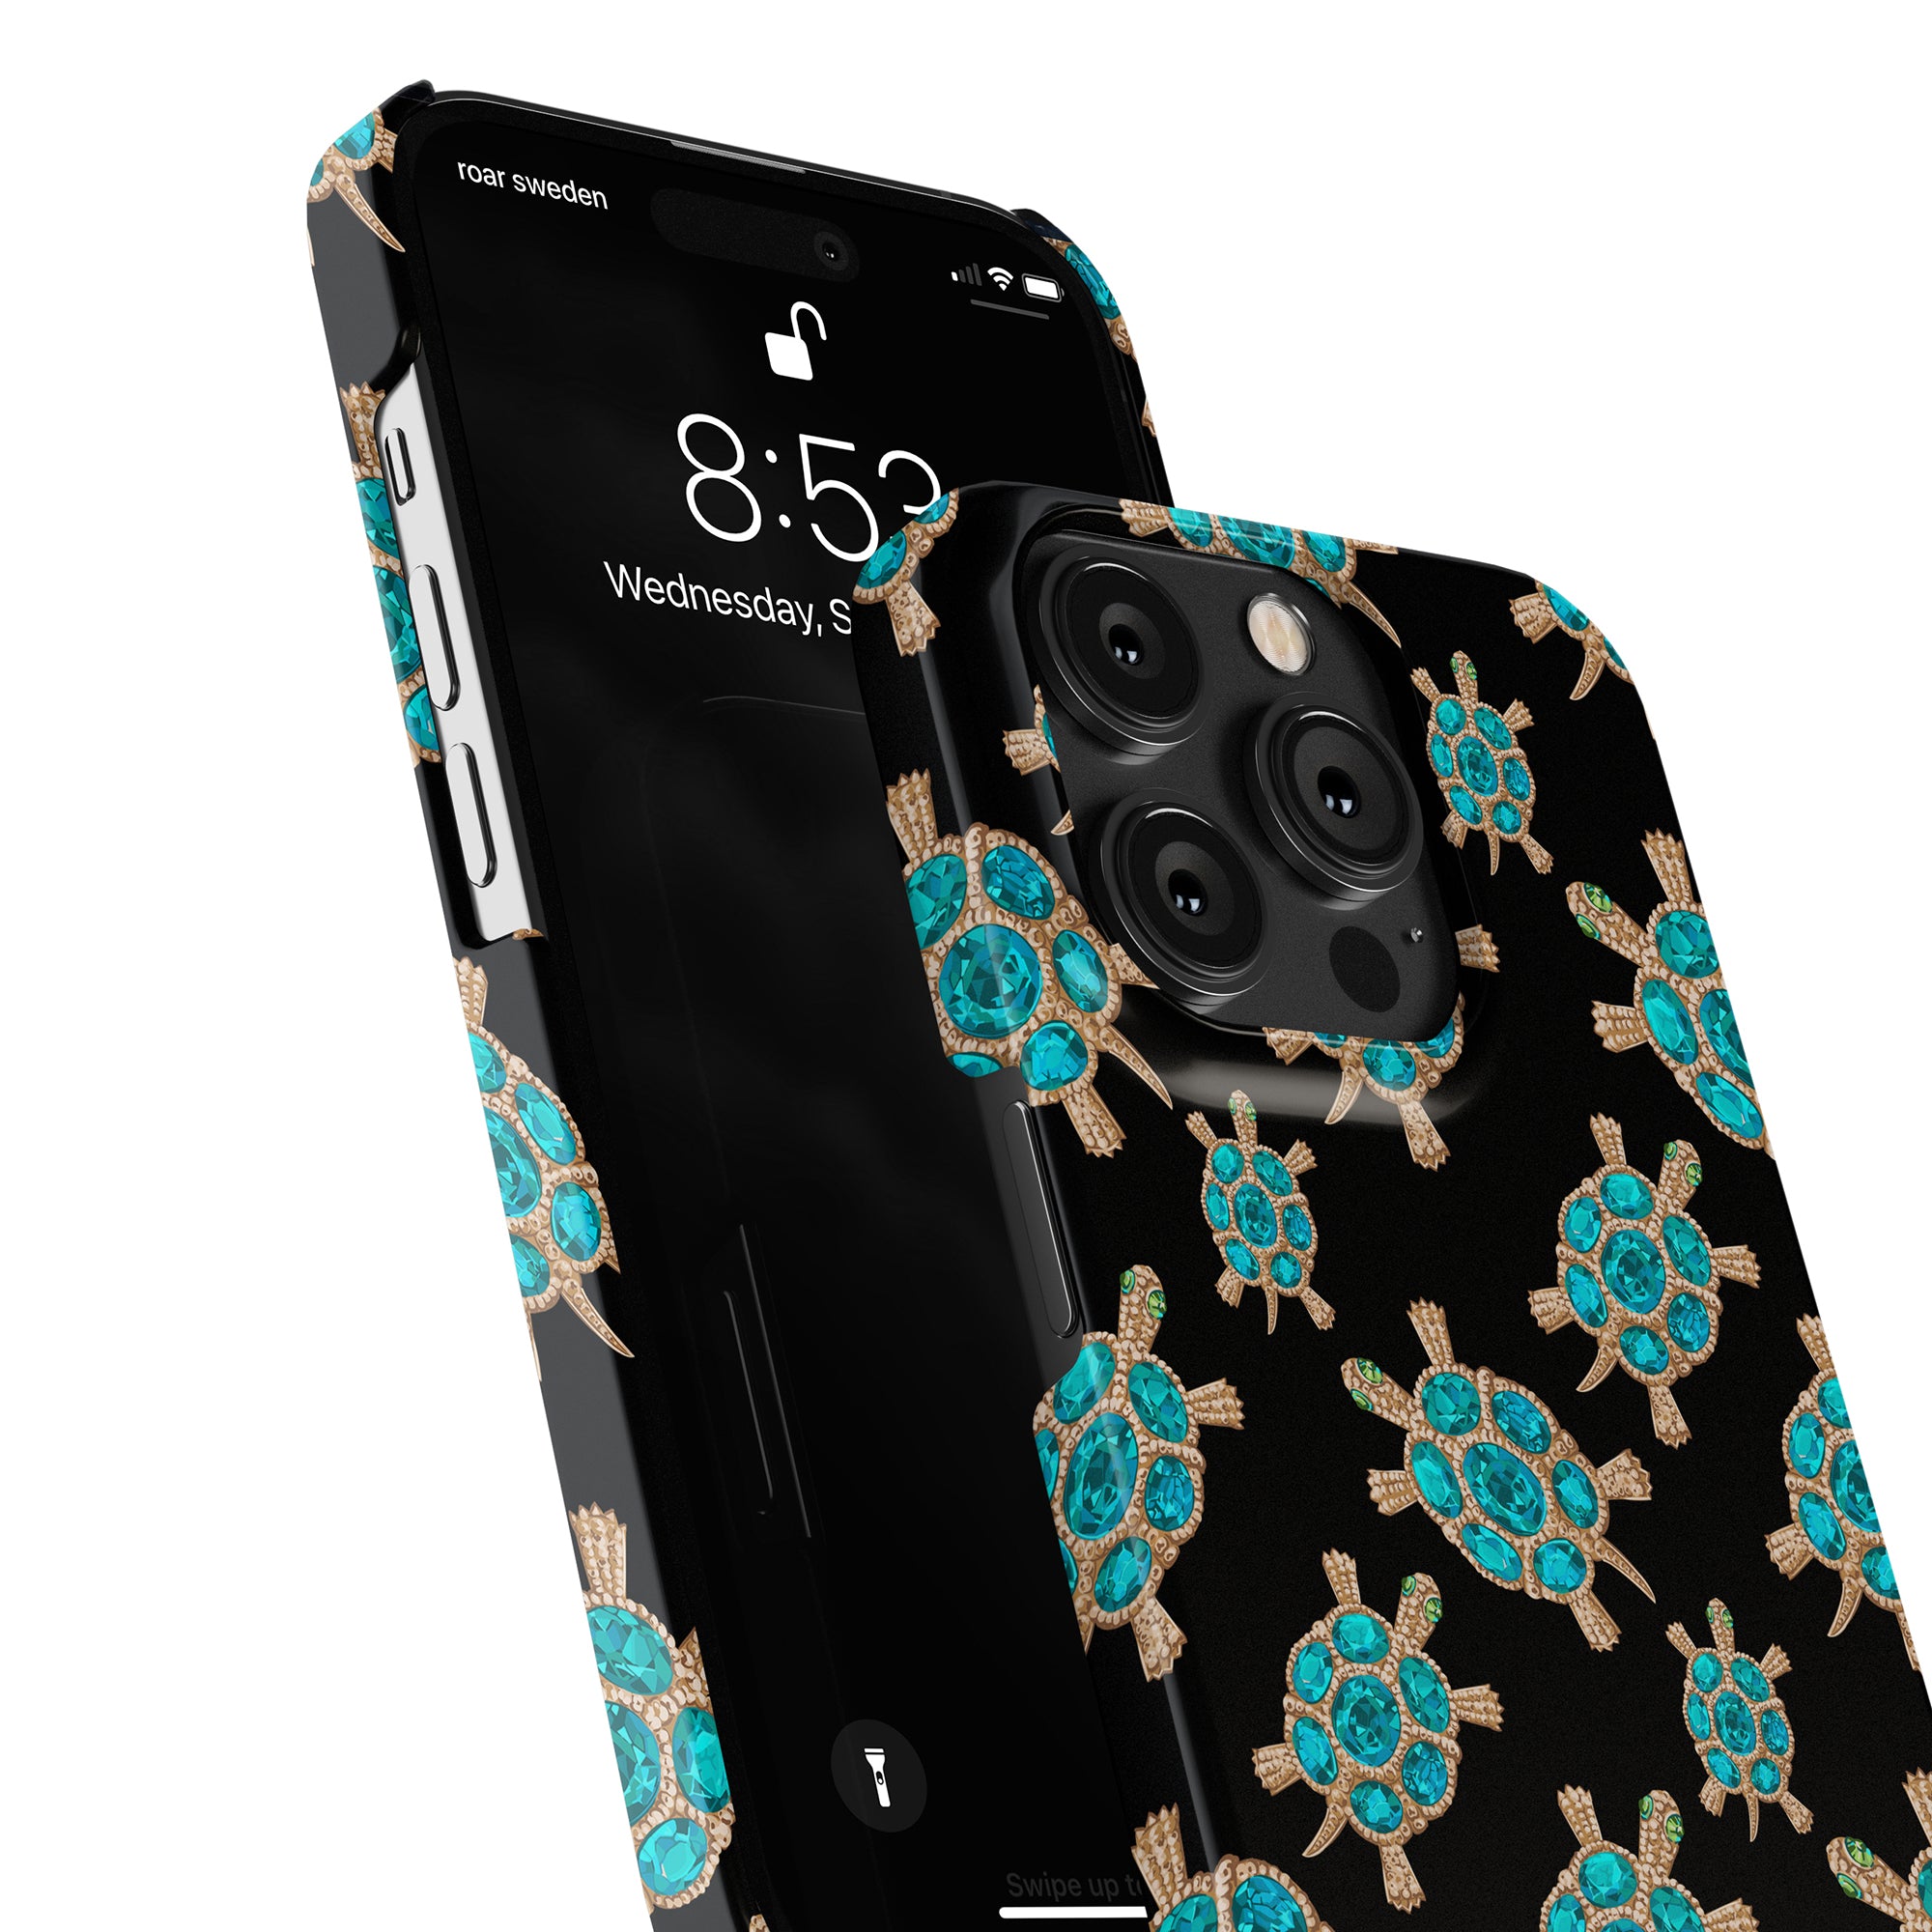 An elegant smartphone accessory, the Diamond Turtle - Slim case features a stylish design with turquoise turtles on a black background.